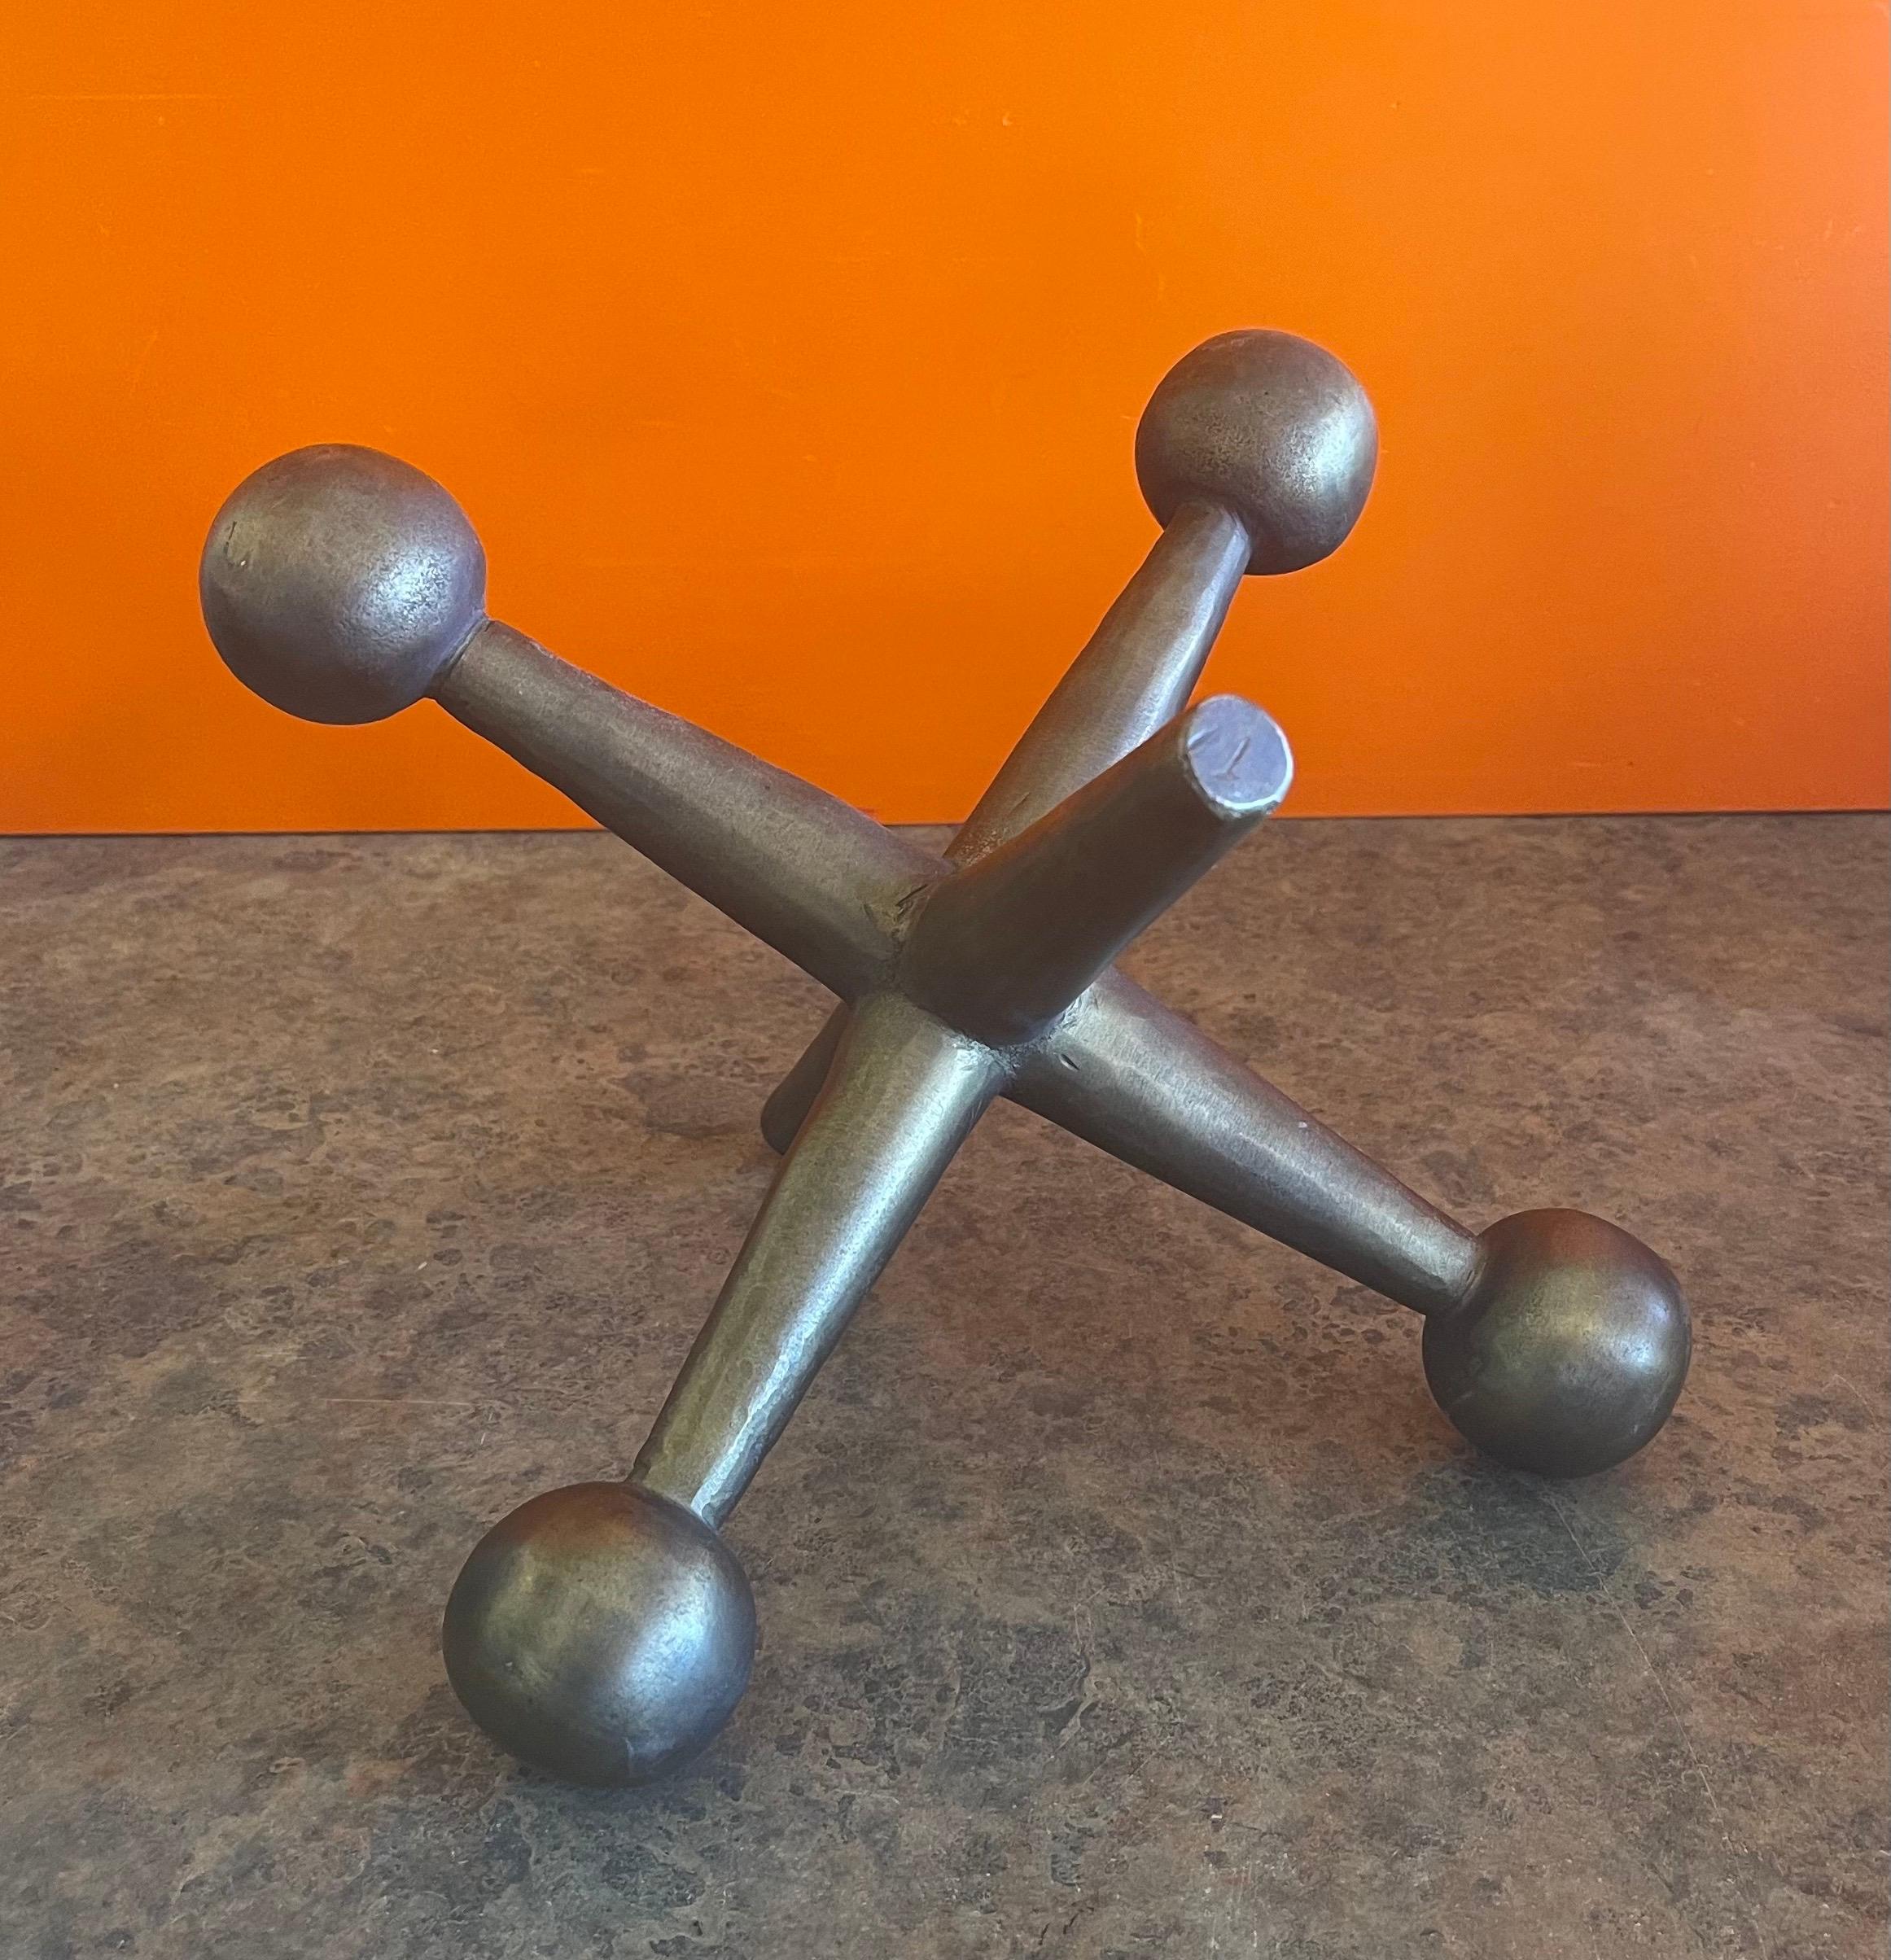 Vintage atomic era, mid-century modern large iron jack / jax in the style of Bill Curry, circa 1970s. The piece is functional as either a bookend, door stop or decorative accent and has a nice well worn metallic patina; it measures 9.5